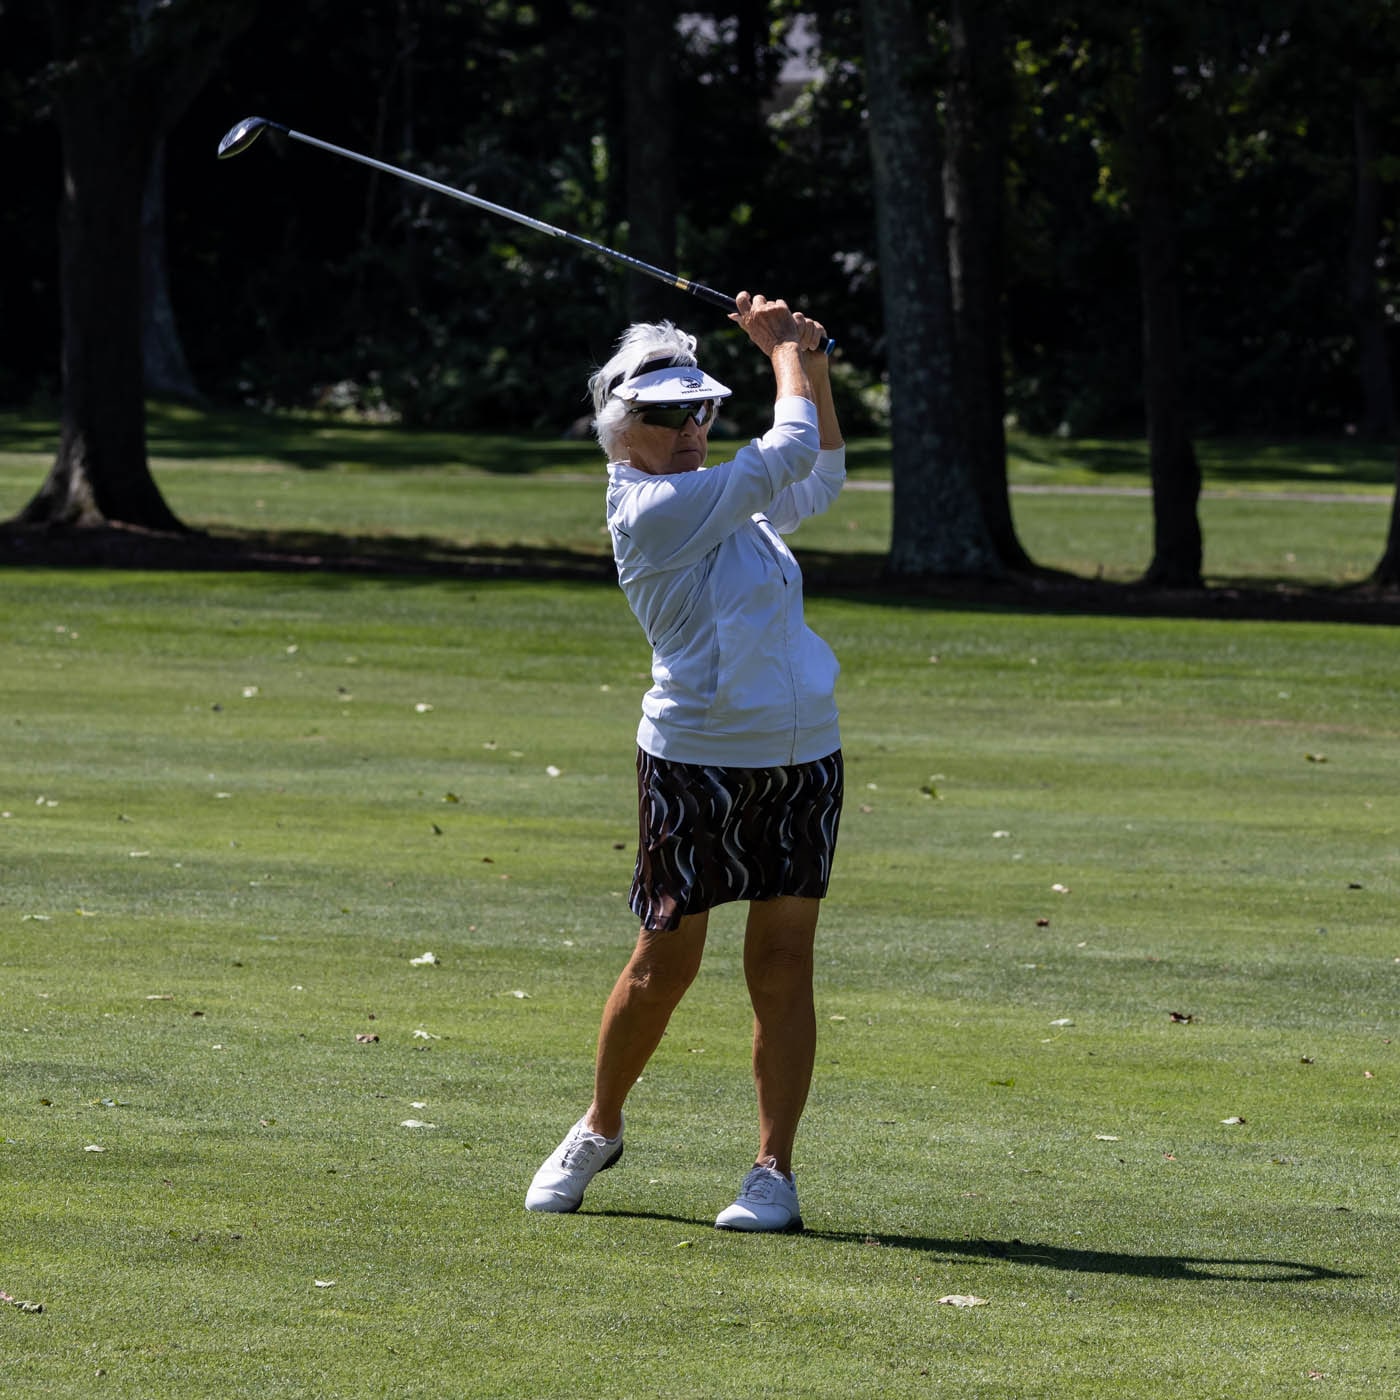 Country-Club-Of-New-Bedford FB-2023-Womens-FB-Gallery August-2023-Country-Club-Of-New-Bedford-FB-2023-Womens-FB-Gallery August-2023-Womens-FB-Gallery-Tuesday-Photos-Image-33